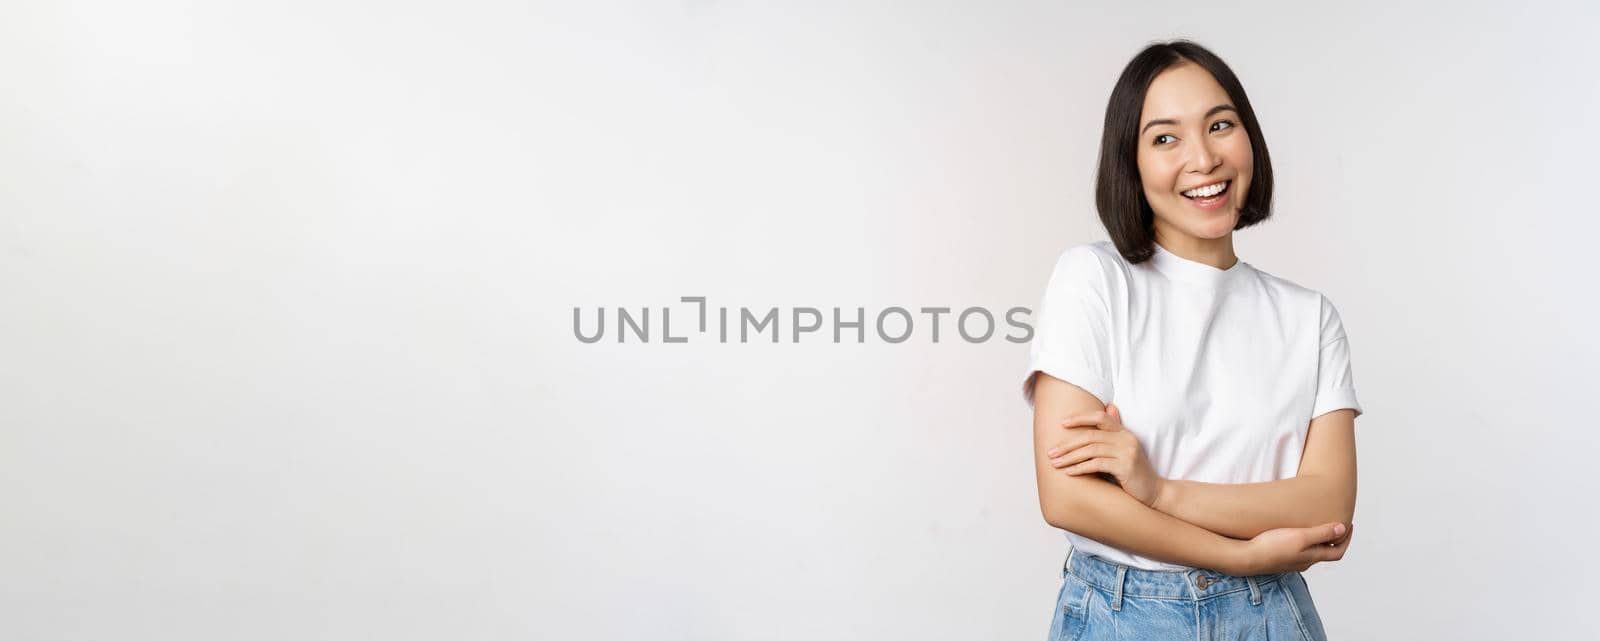 Portrait of happy asian woman smiling, posing confident, cross arms on chest, standing against studio background.